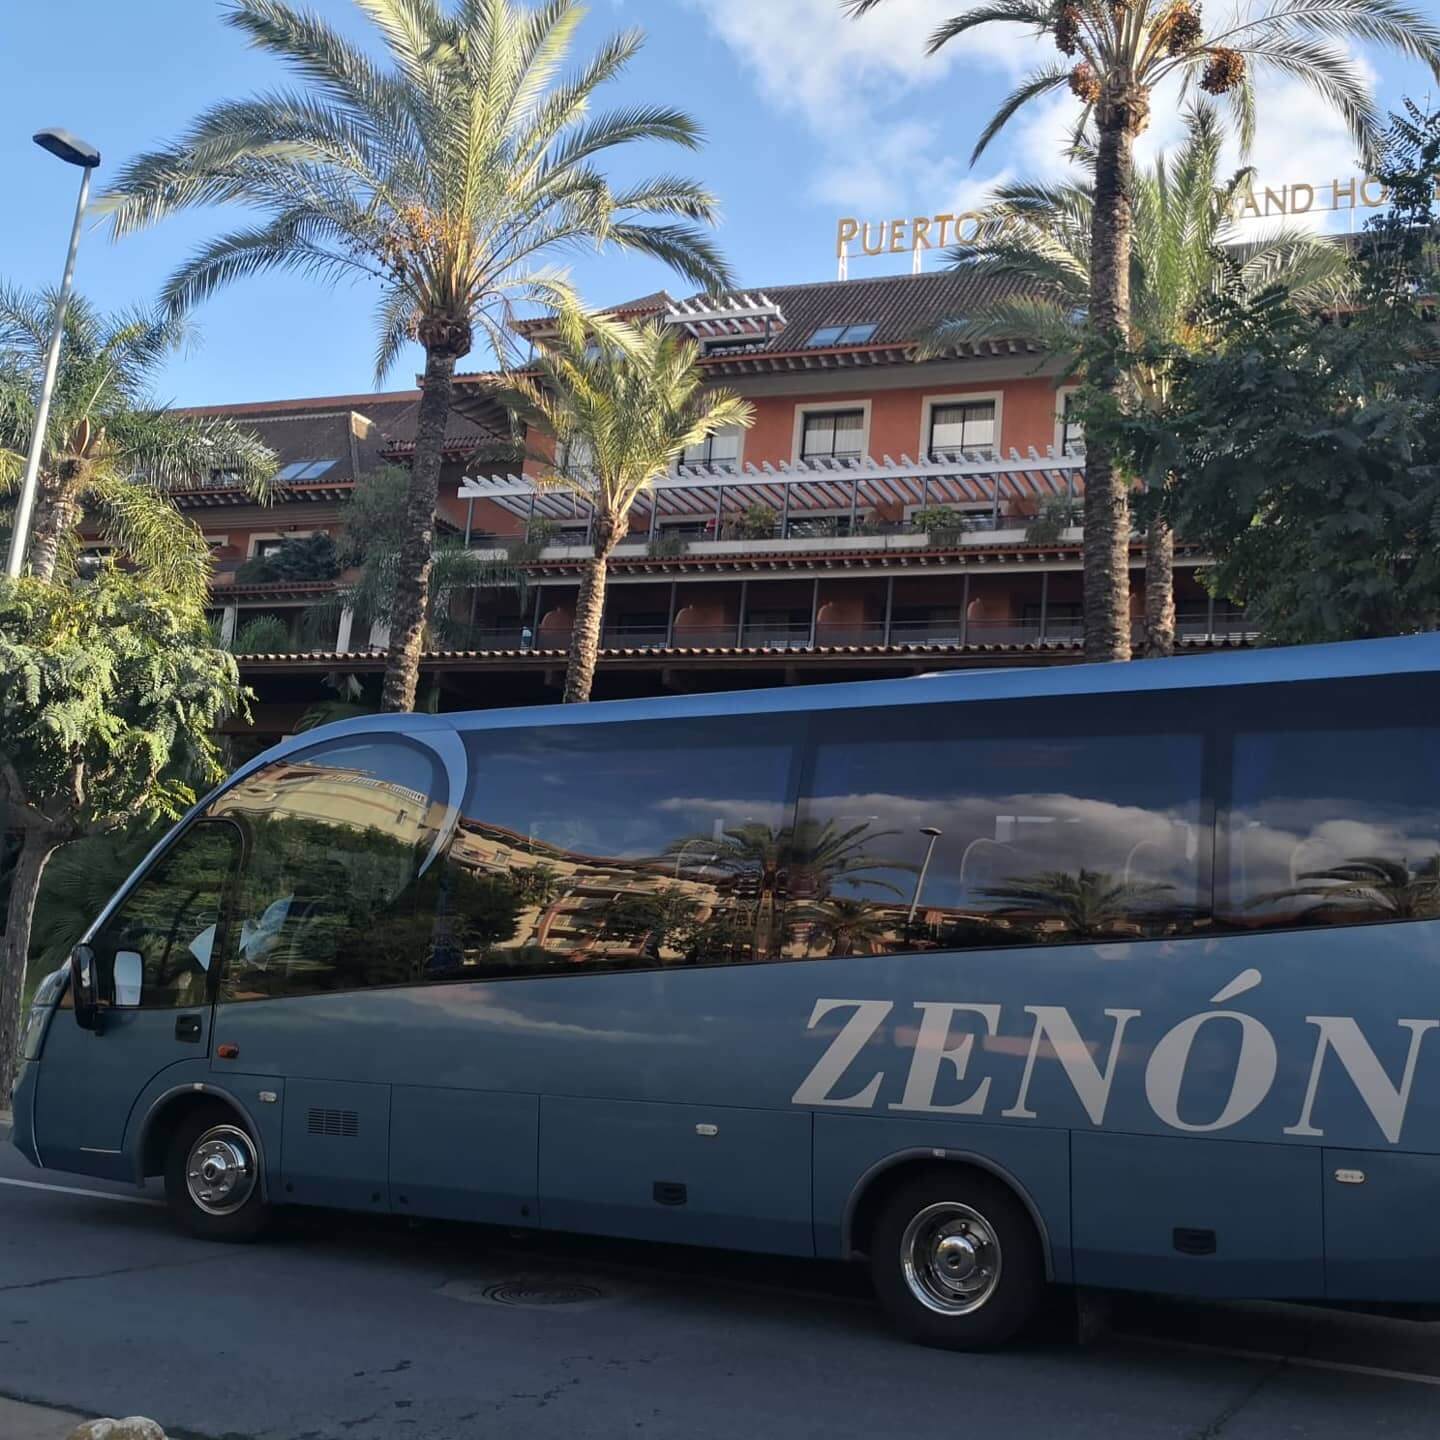 Rent a 31 seater Midibus (IVECO MAGO INDICAR 2 2011) from TRASPORTE VIAJES ZENON from LEPE 